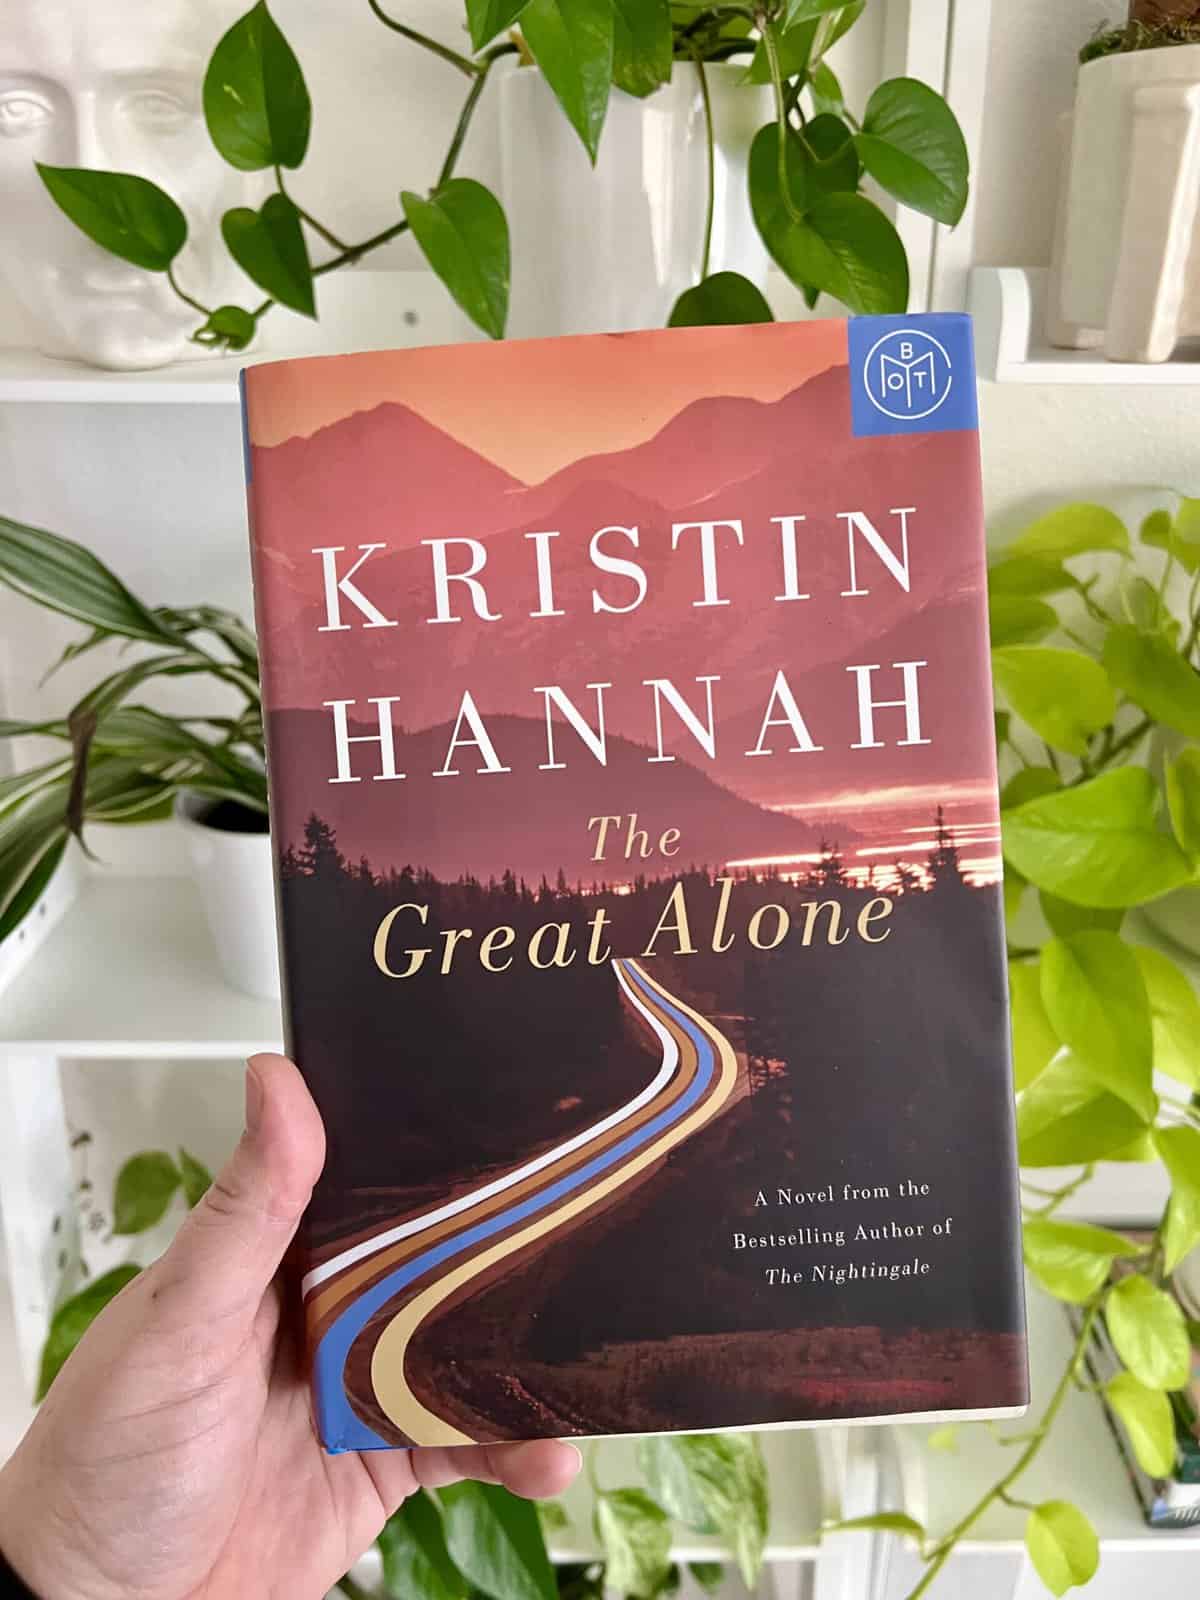 A hardcover book copy of The Great Alone by Kristin Hannah with a bunch of green plants behind it